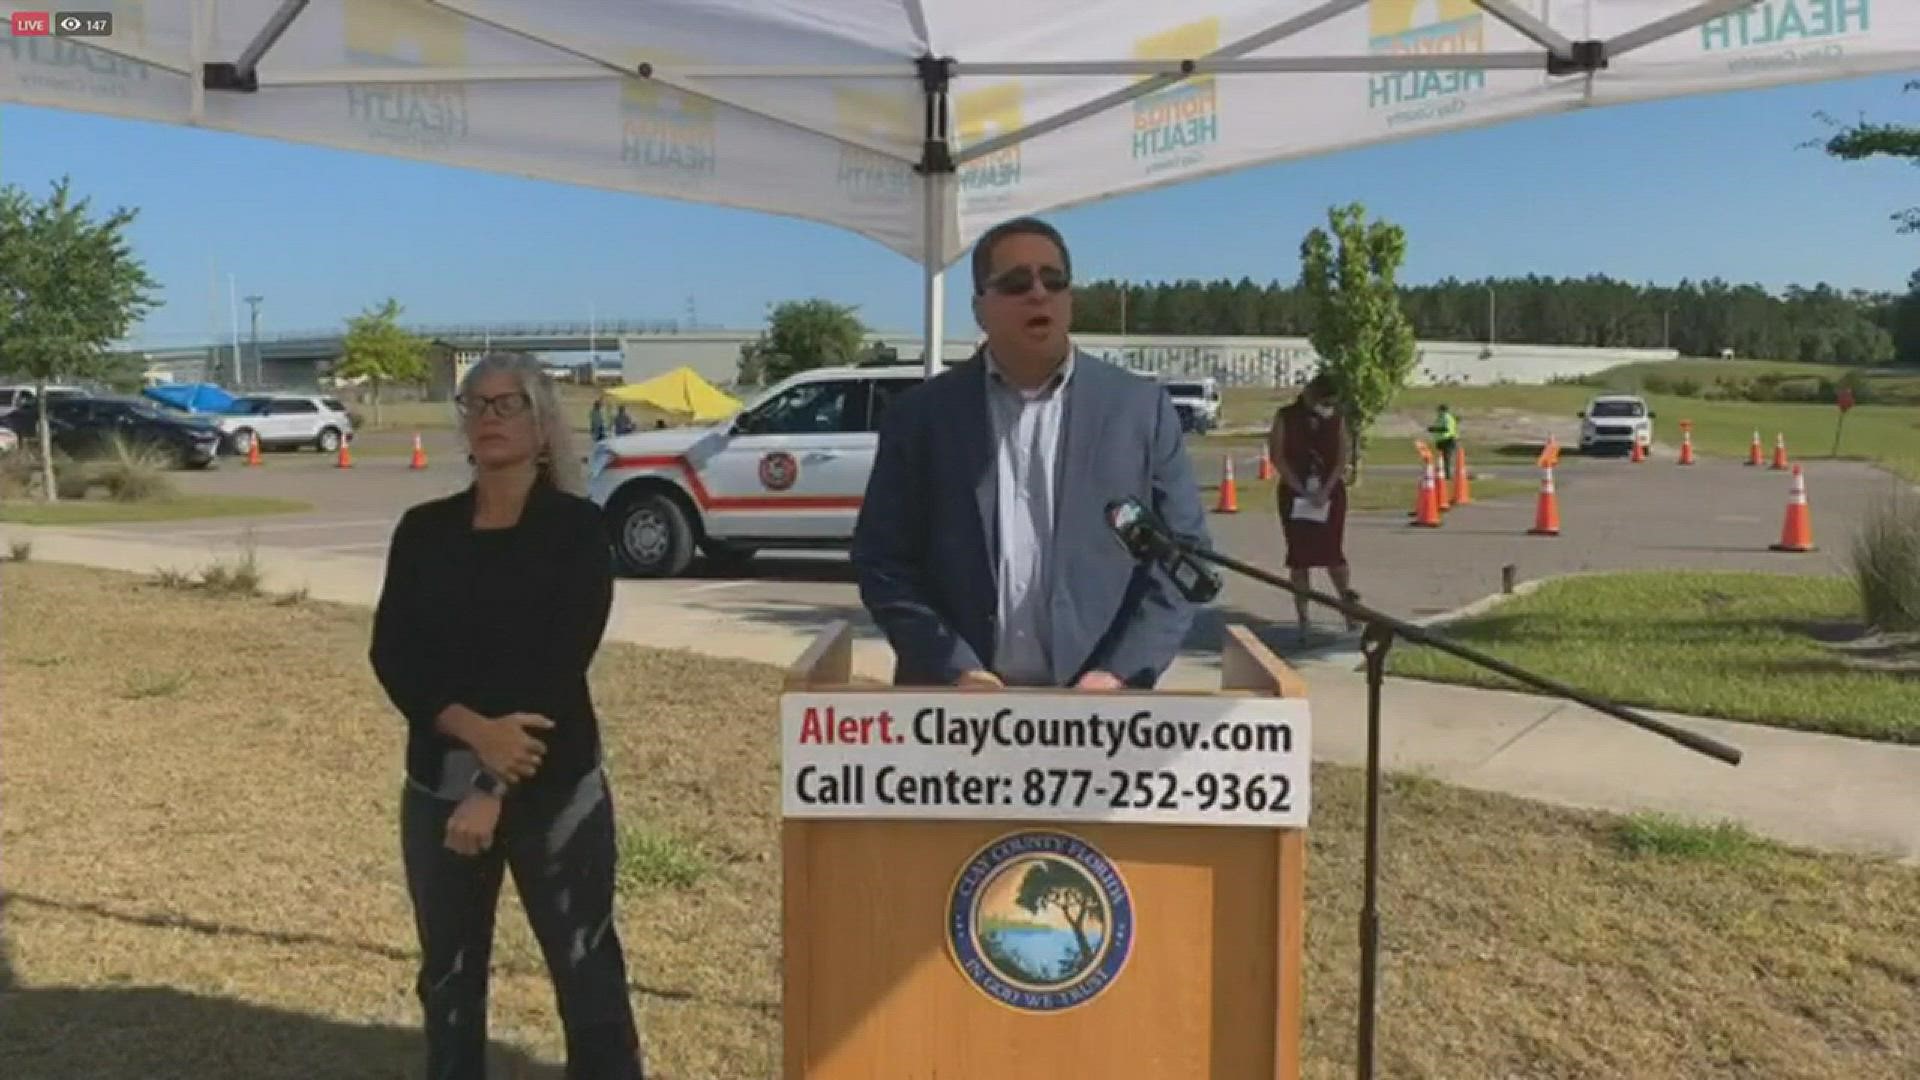 Clay County will enter Phase 2 when DeSantis makes the announcement.